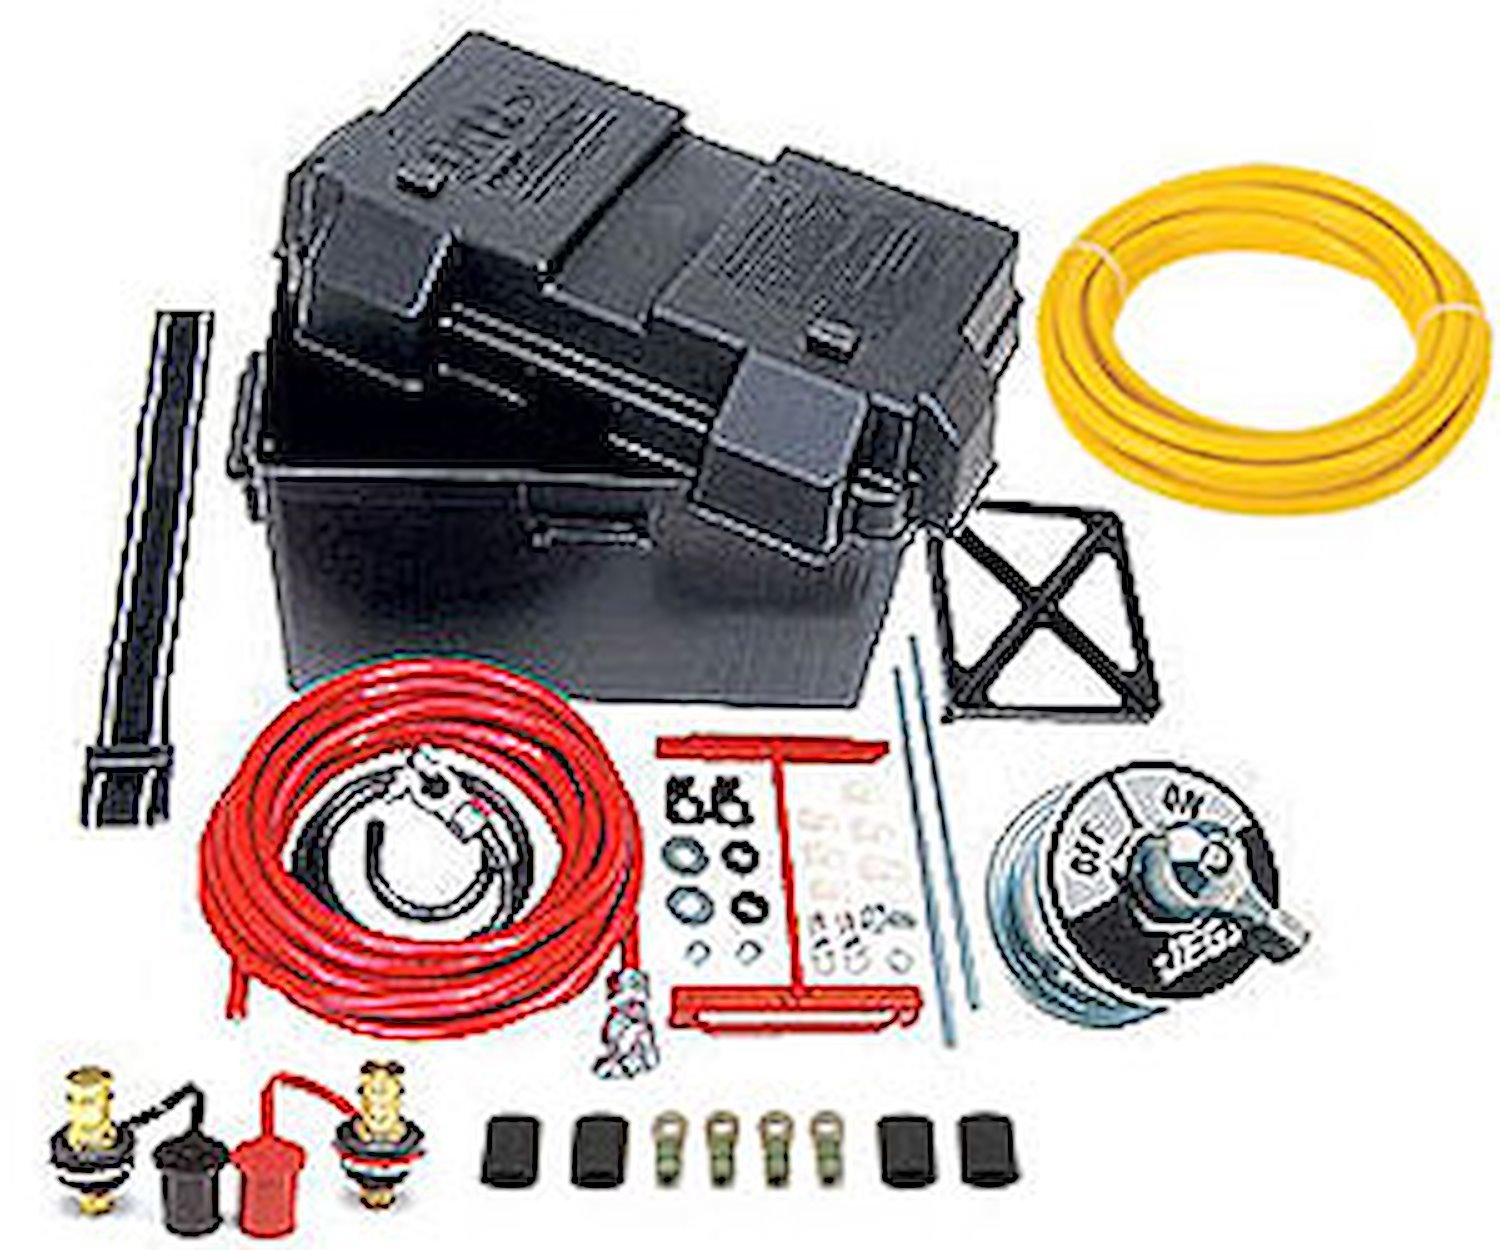 Deluxe Automotive/Marine Type Battery Relocation Kit